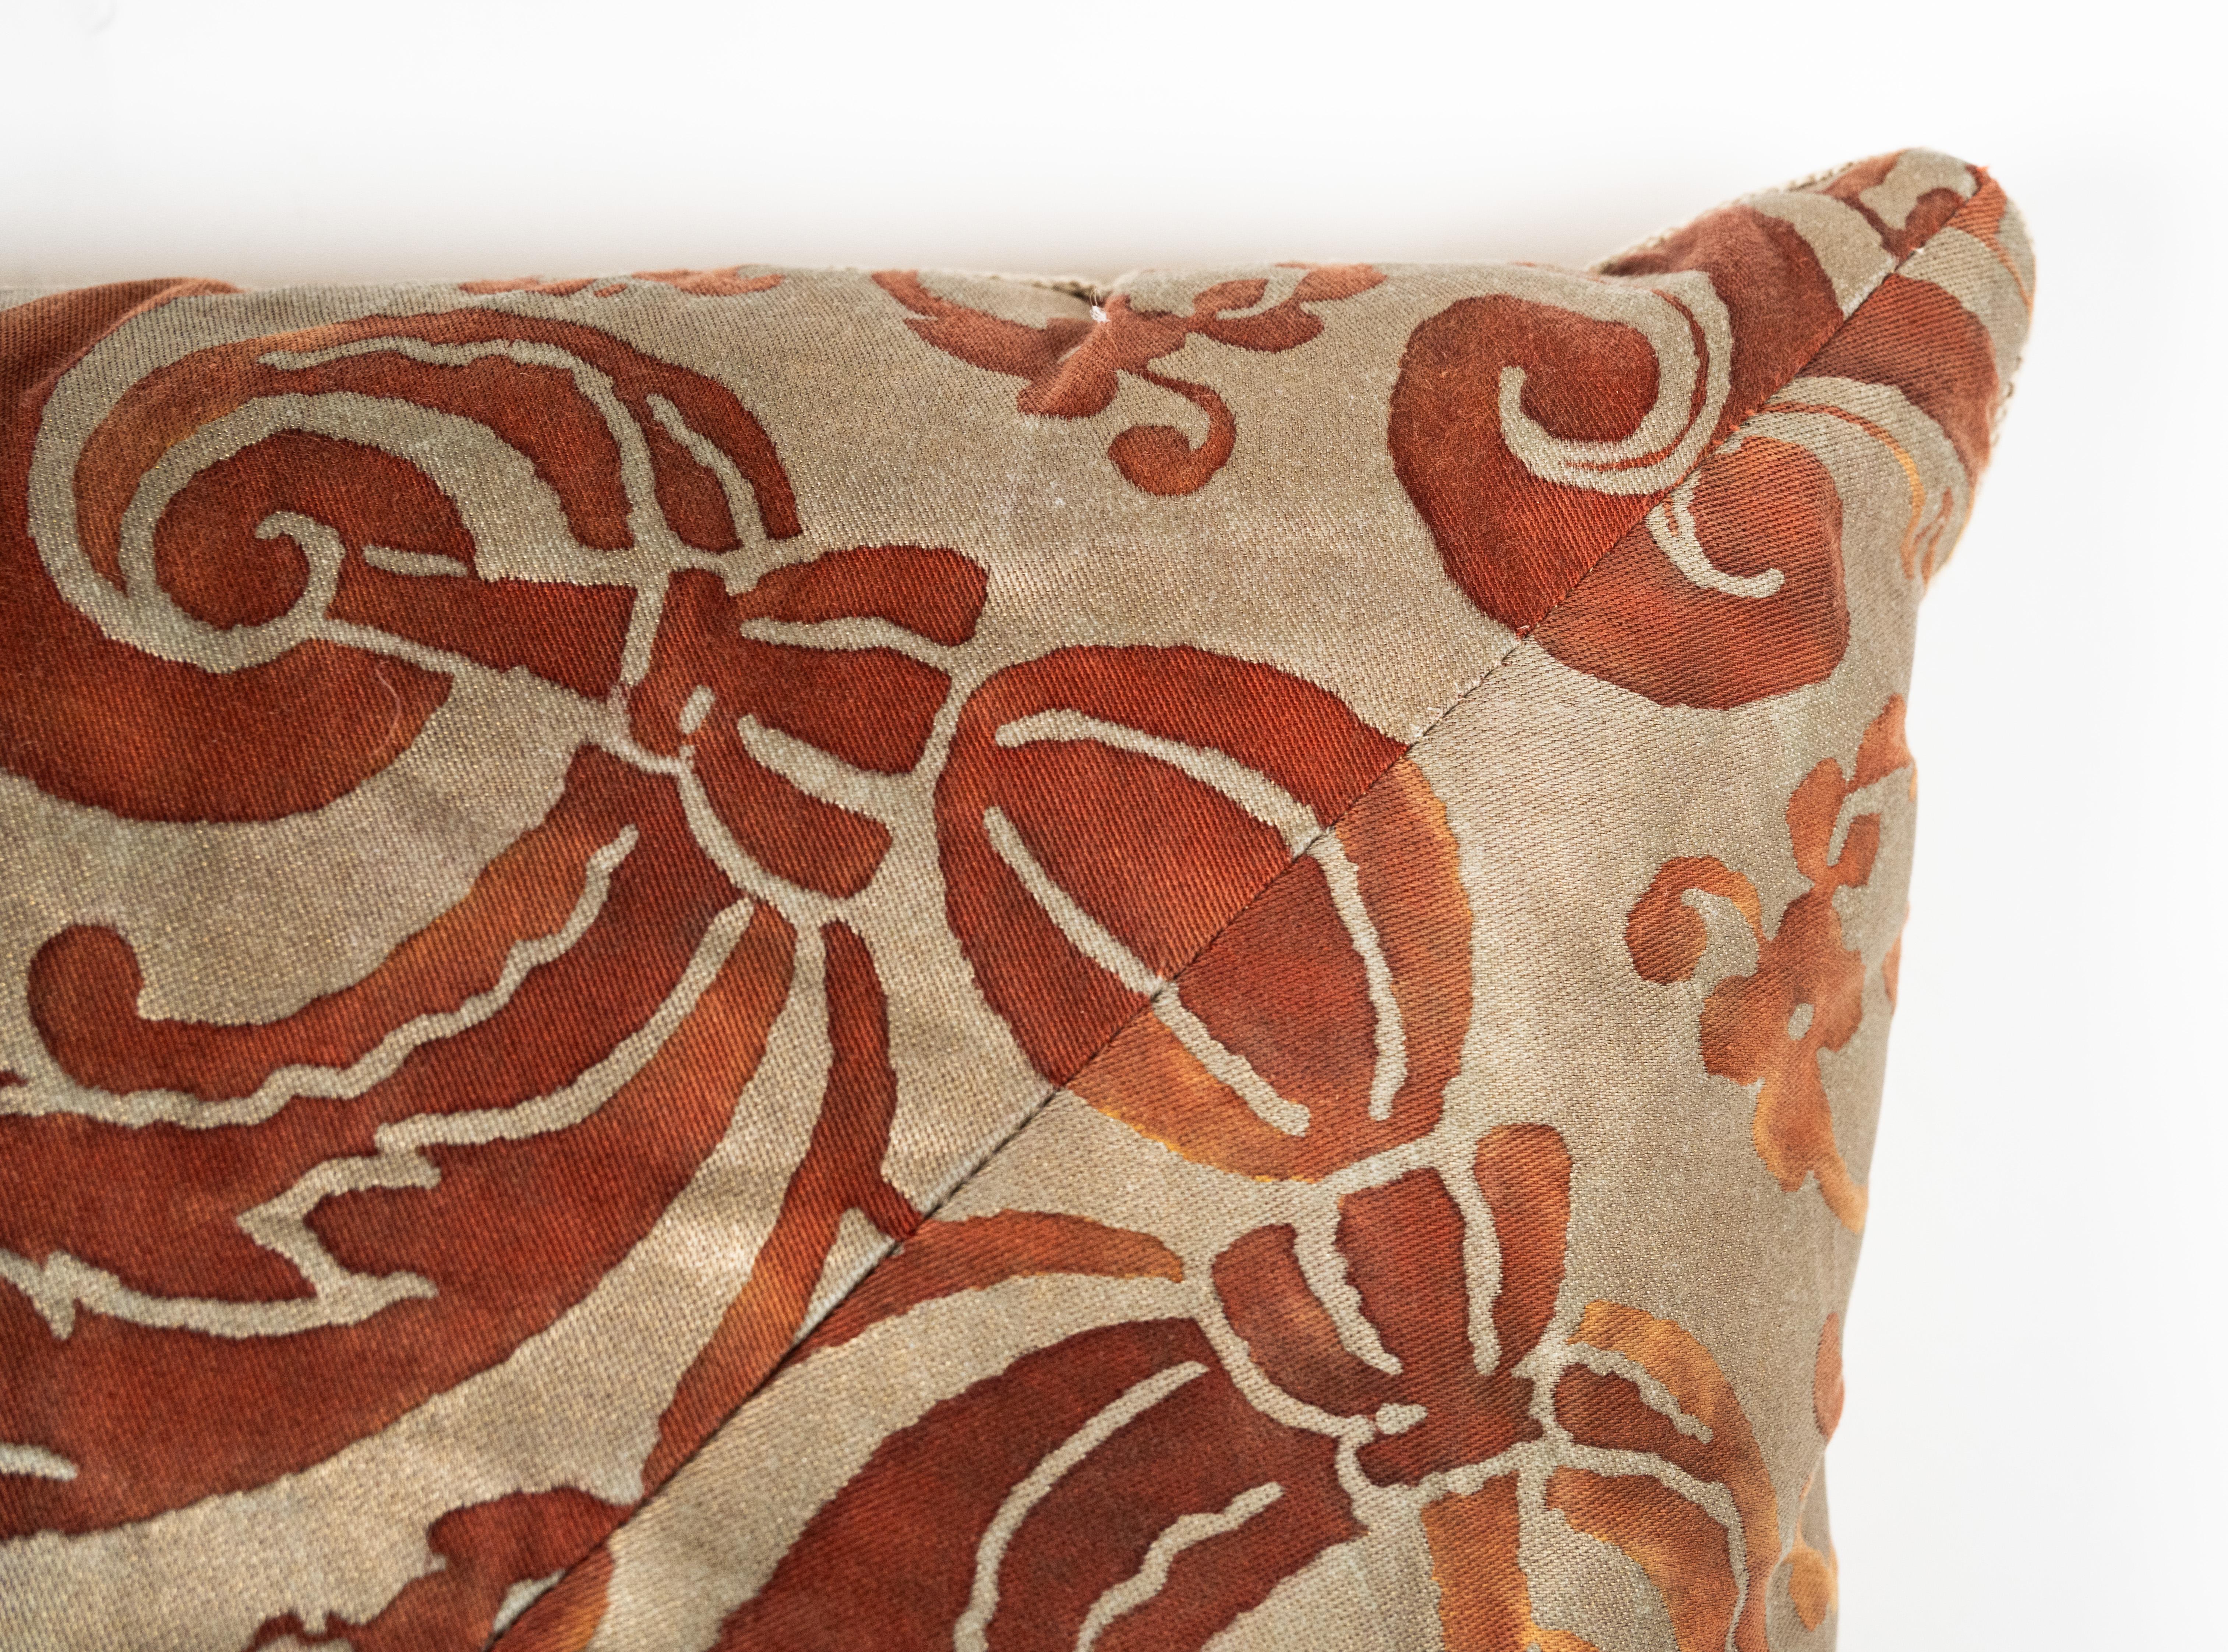 A Mitered Fortuny cushion in the Carnavalet pattern, featuring a red and silvery-gold color way.